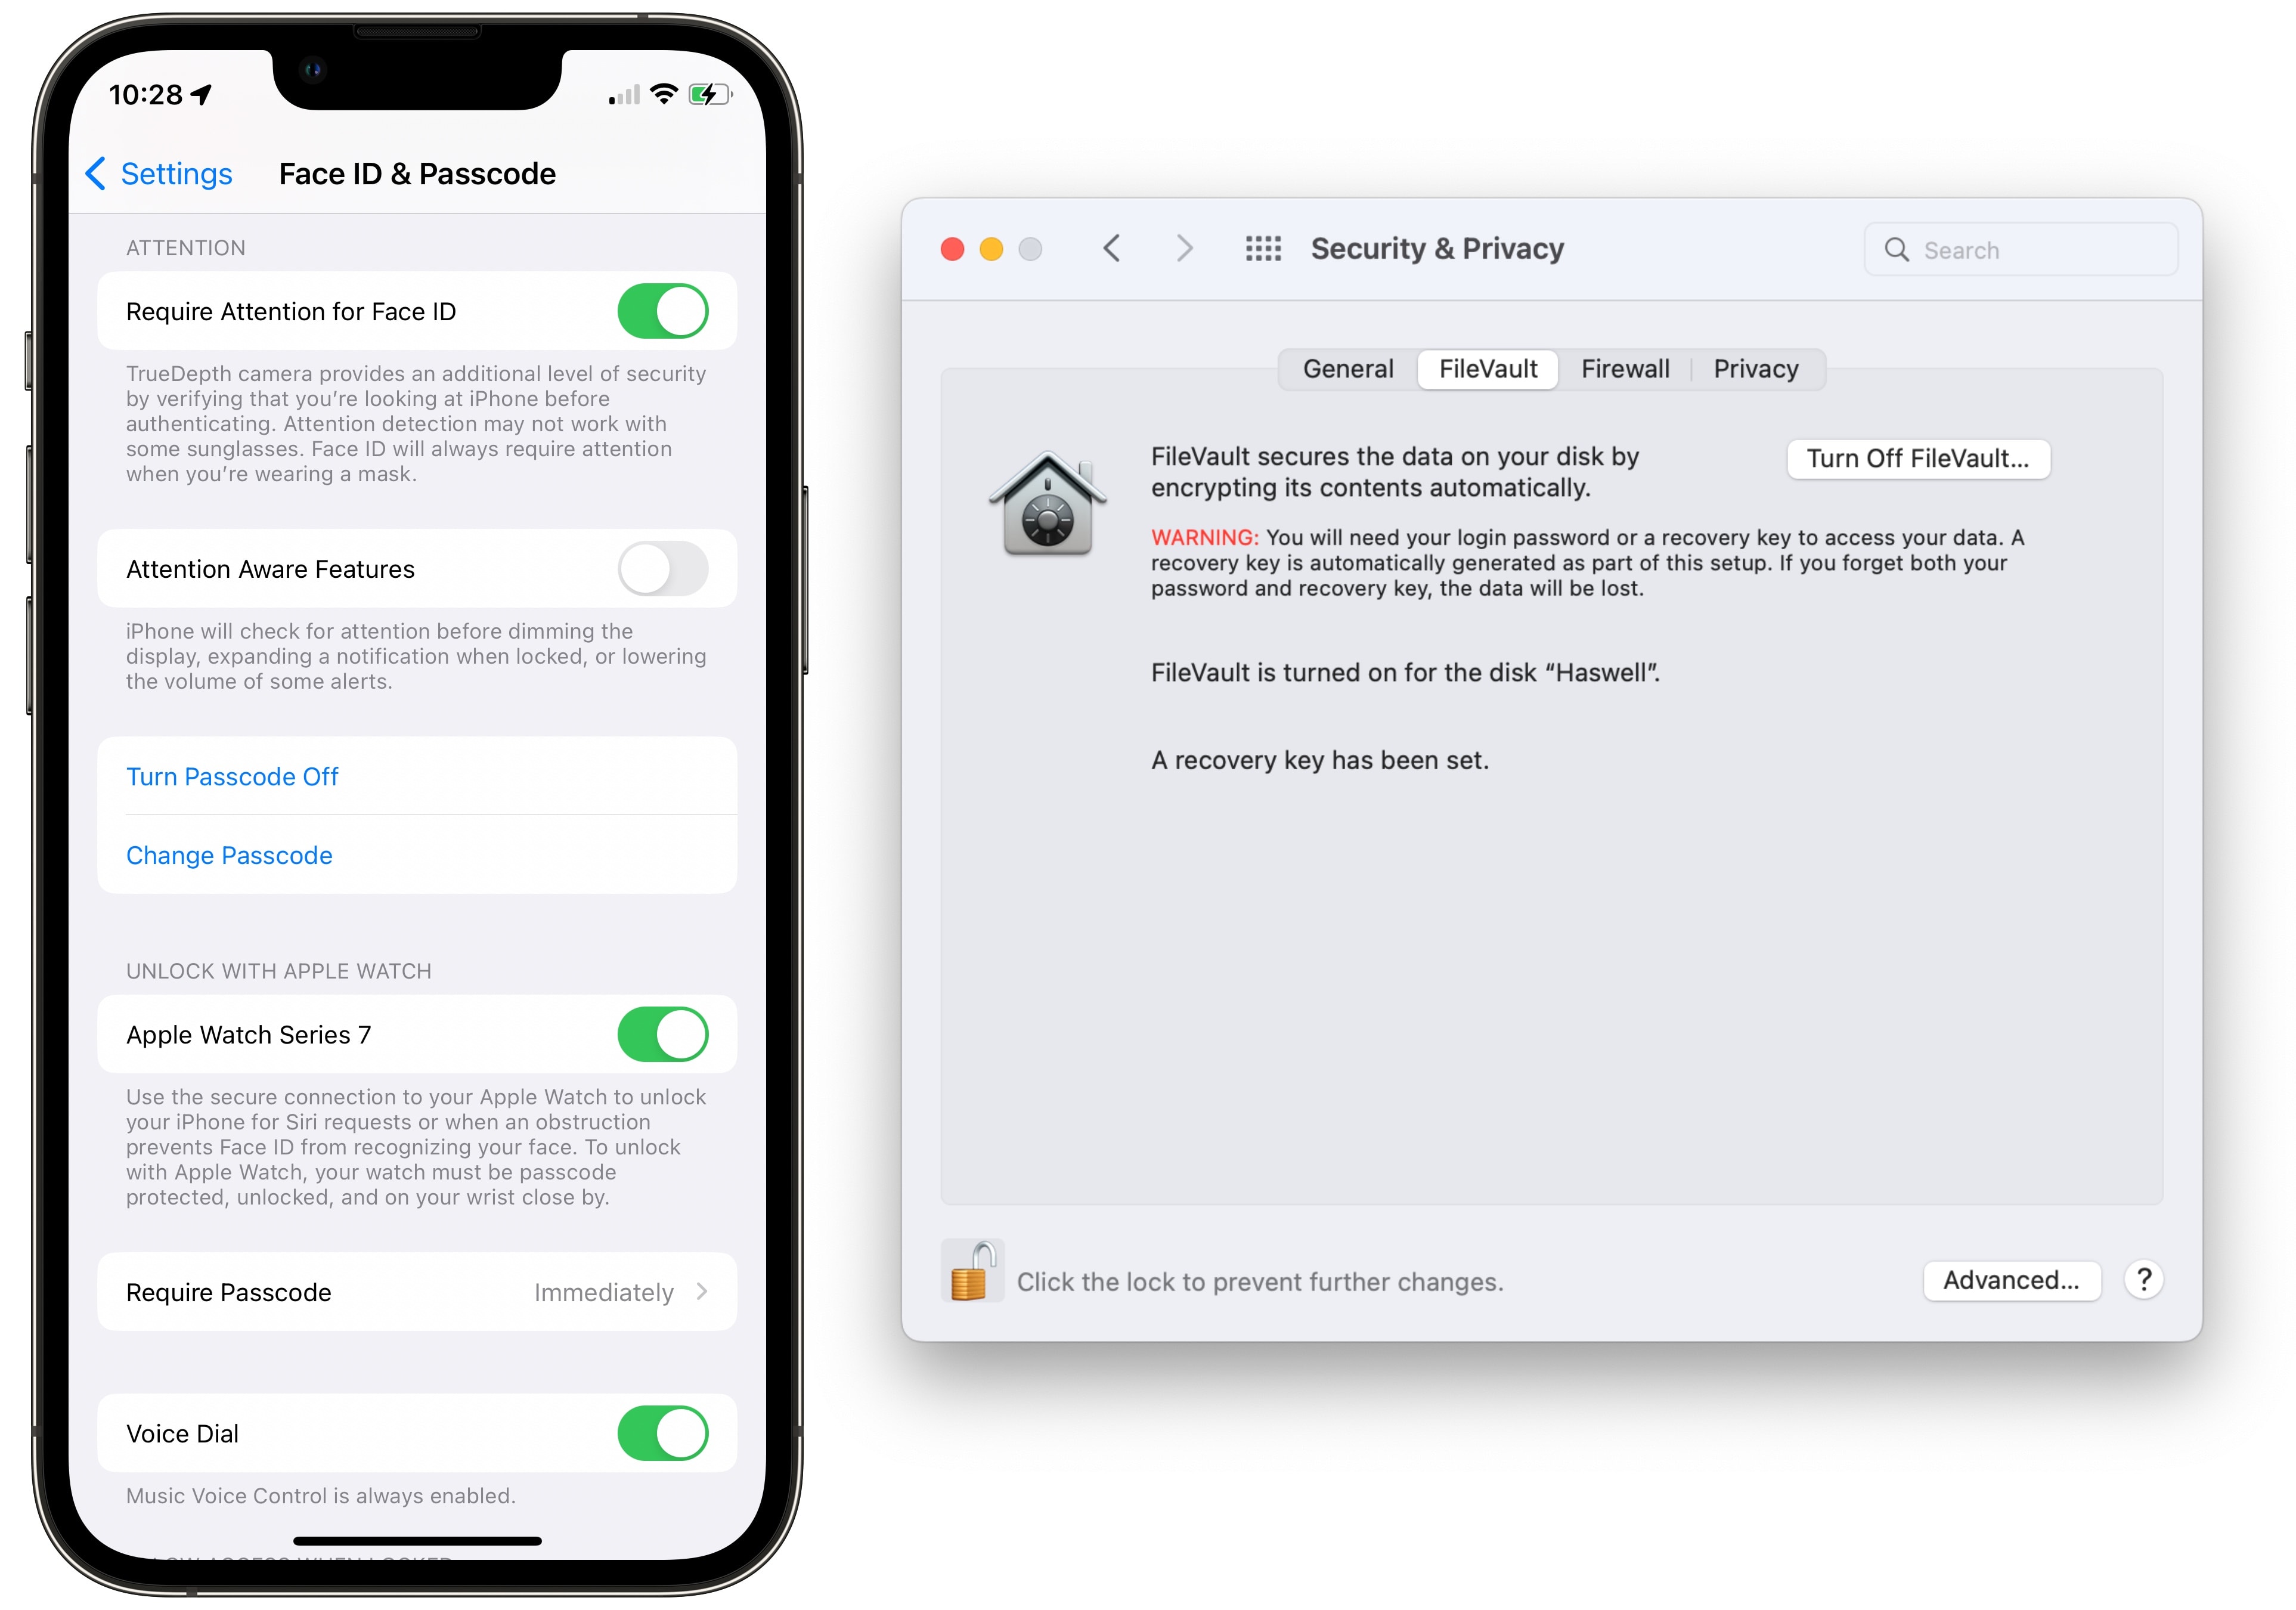 Set a strong alphanumeric passcode on your iPhone and enable FileVault on your Mac.